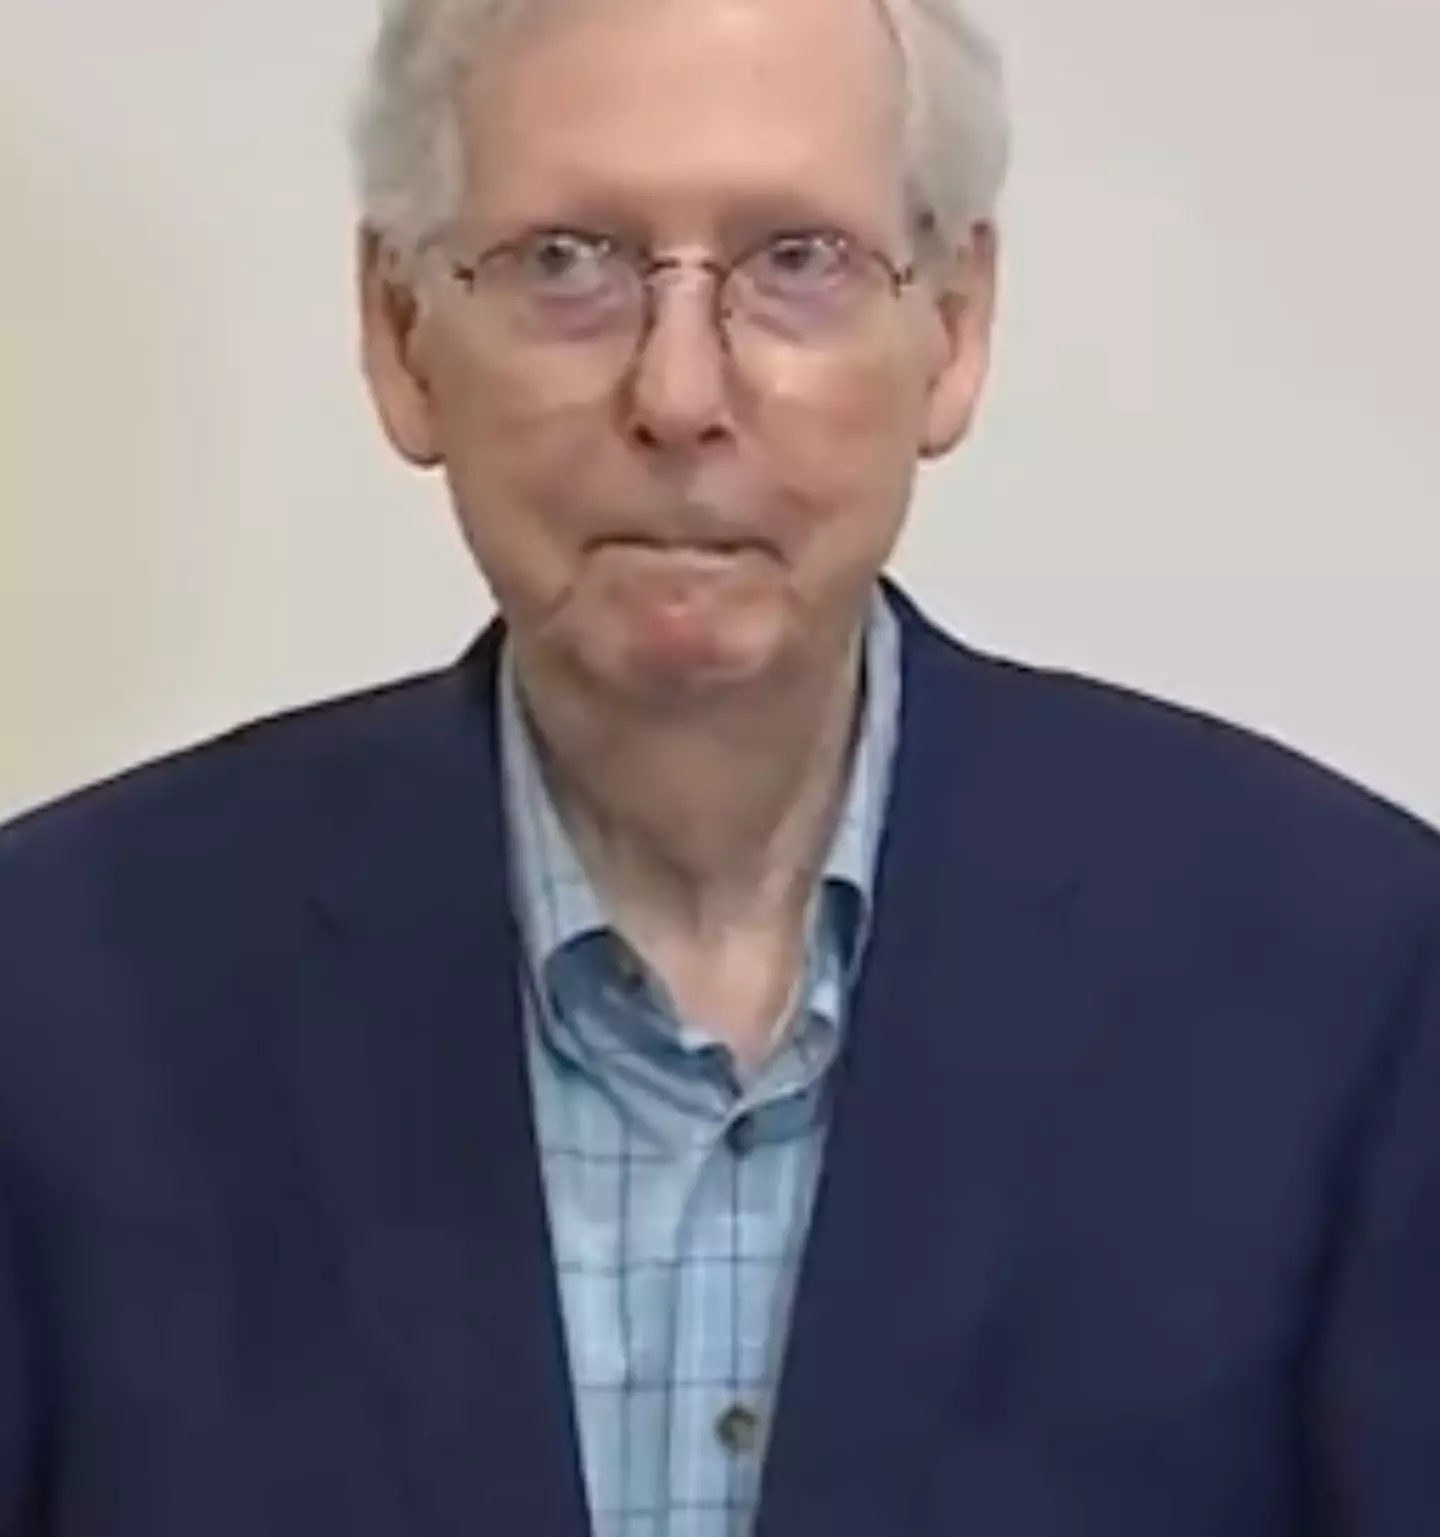 Mitch McConnell froze during a press conference.